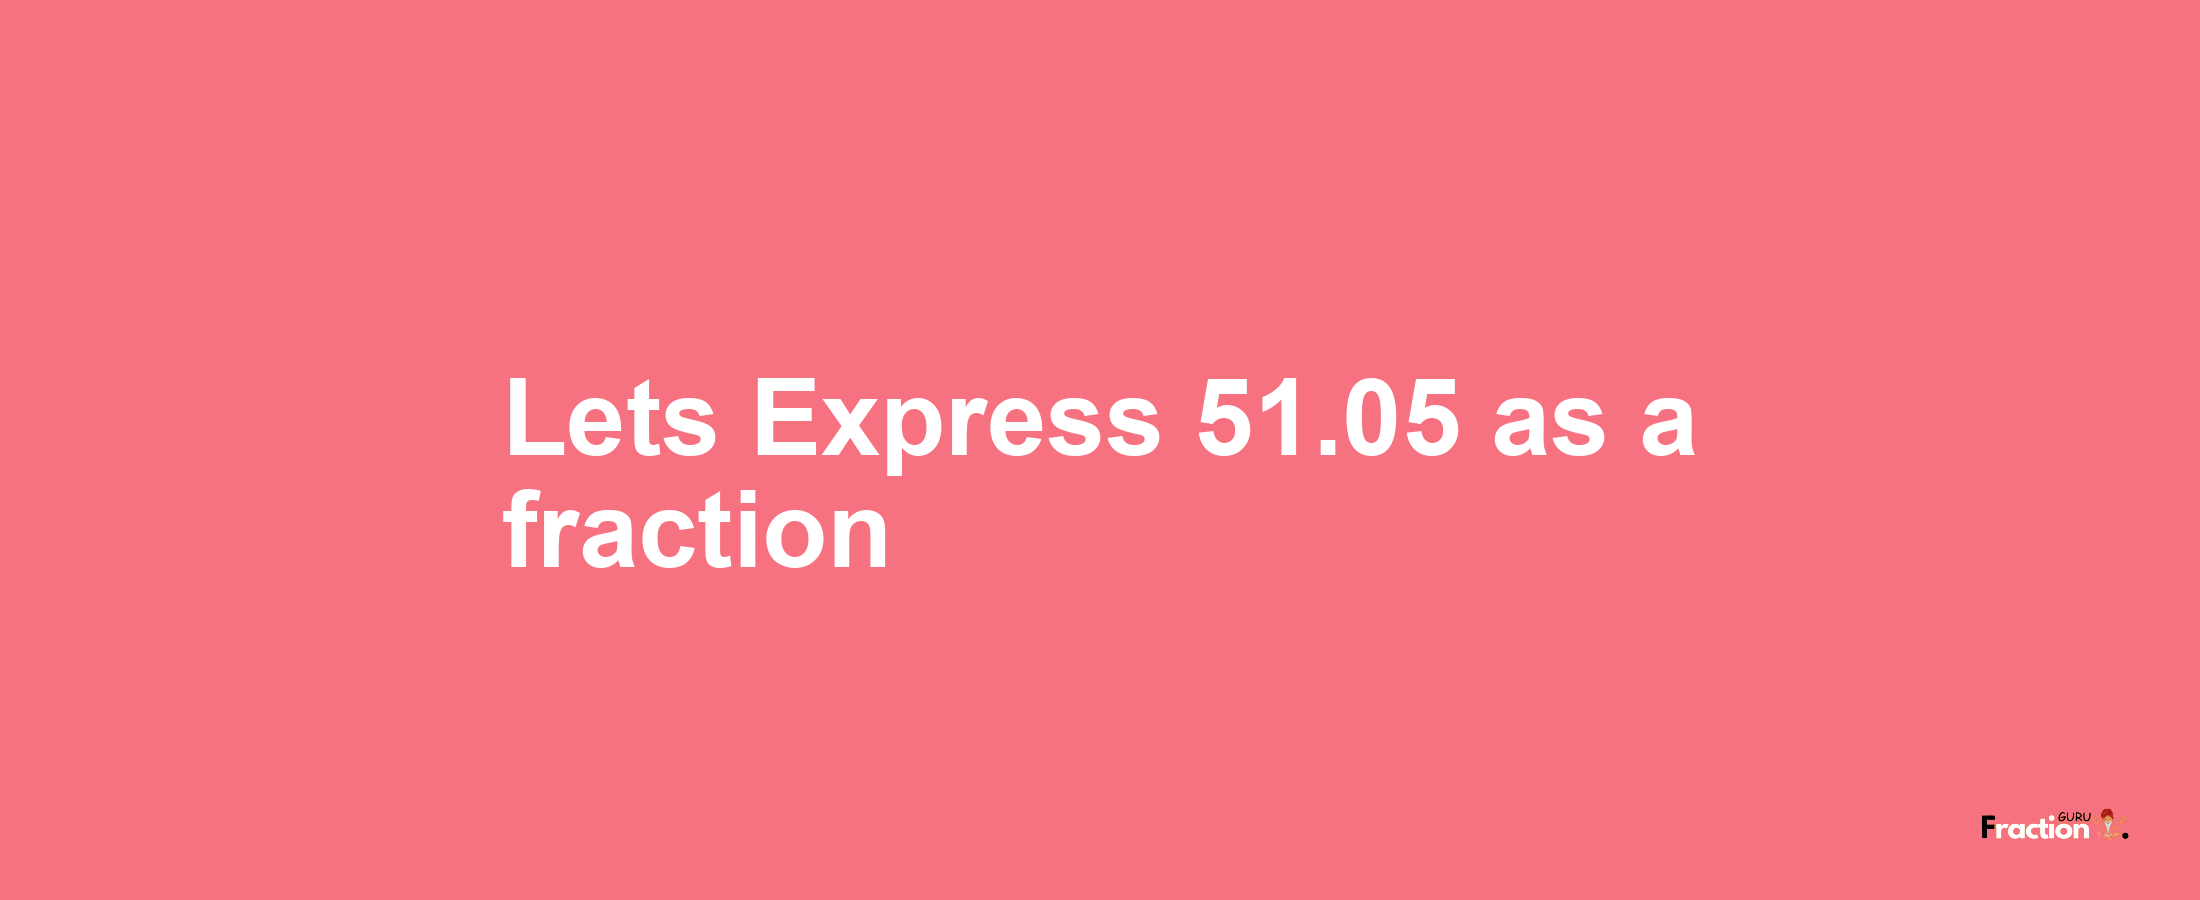 Lets Express 51.05 as afraction